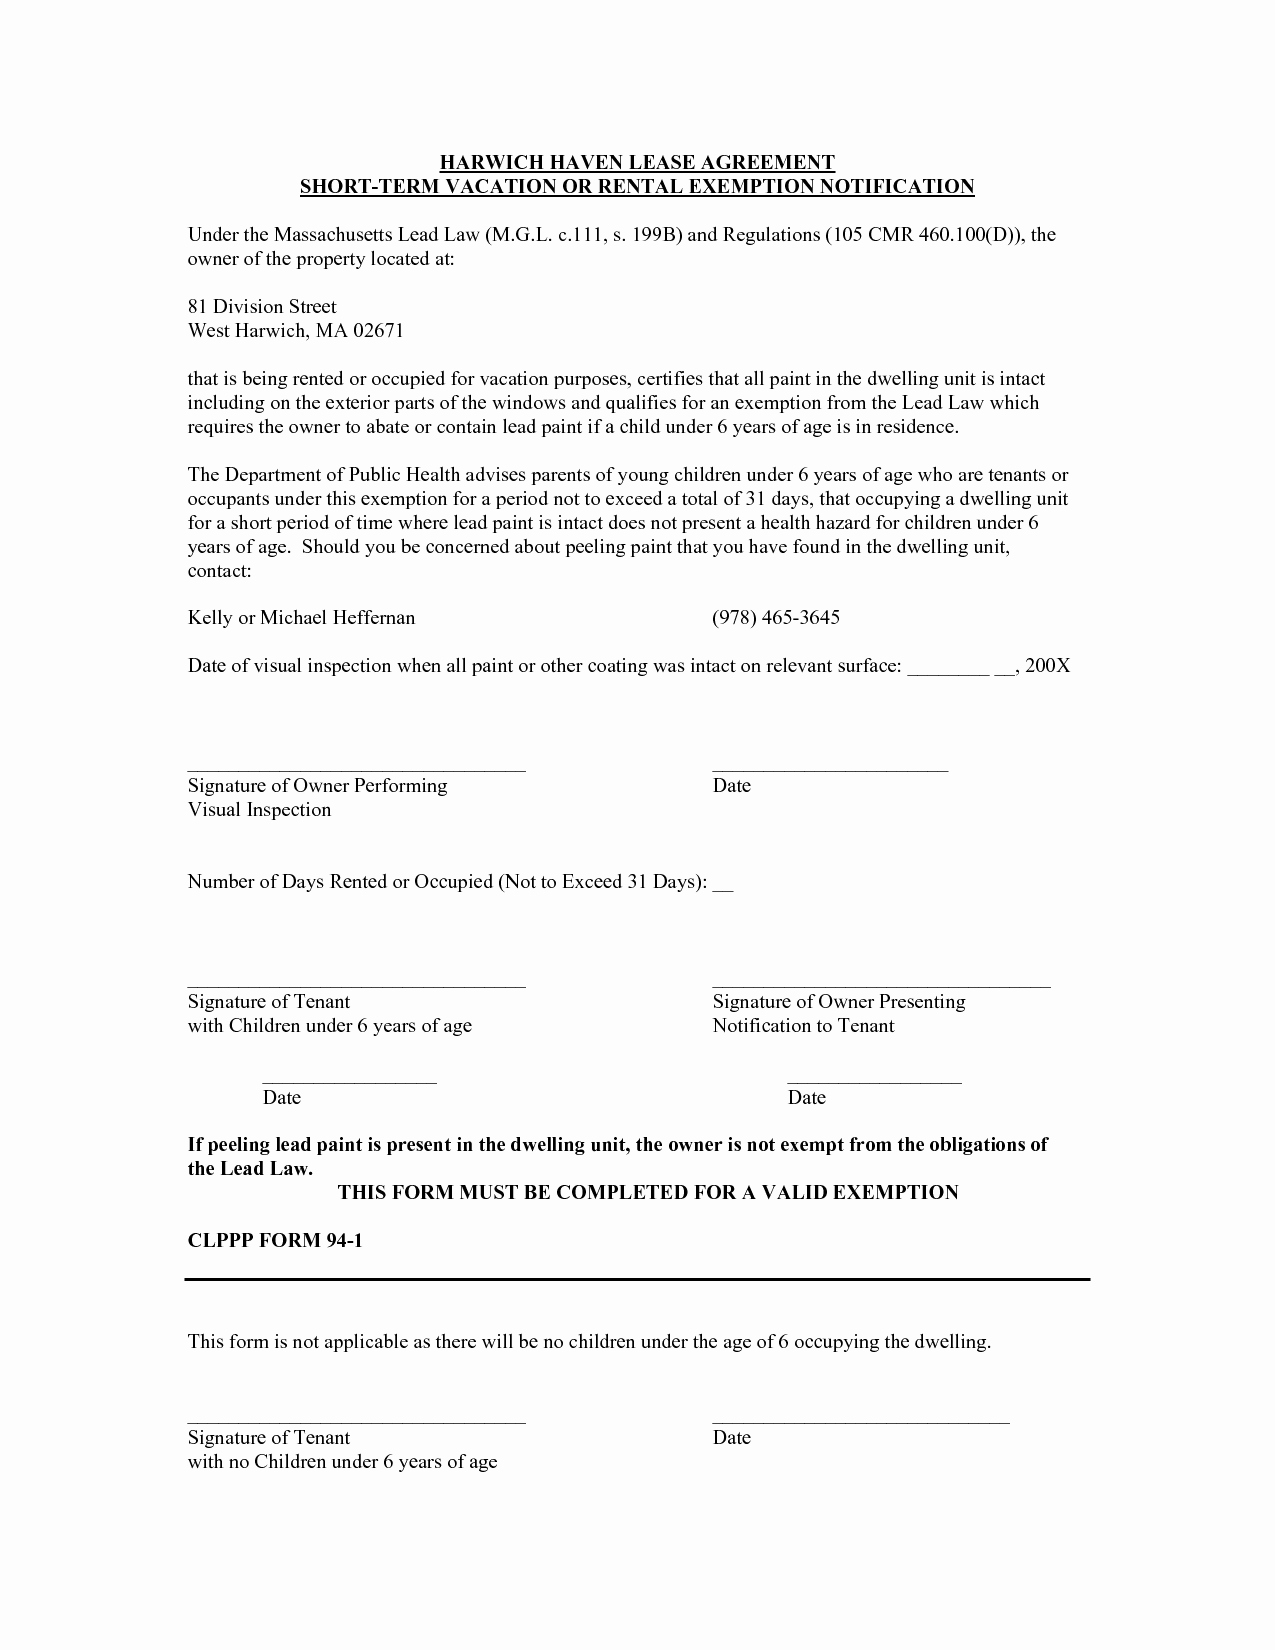 10 Best Of Short form Lease Agreement Template